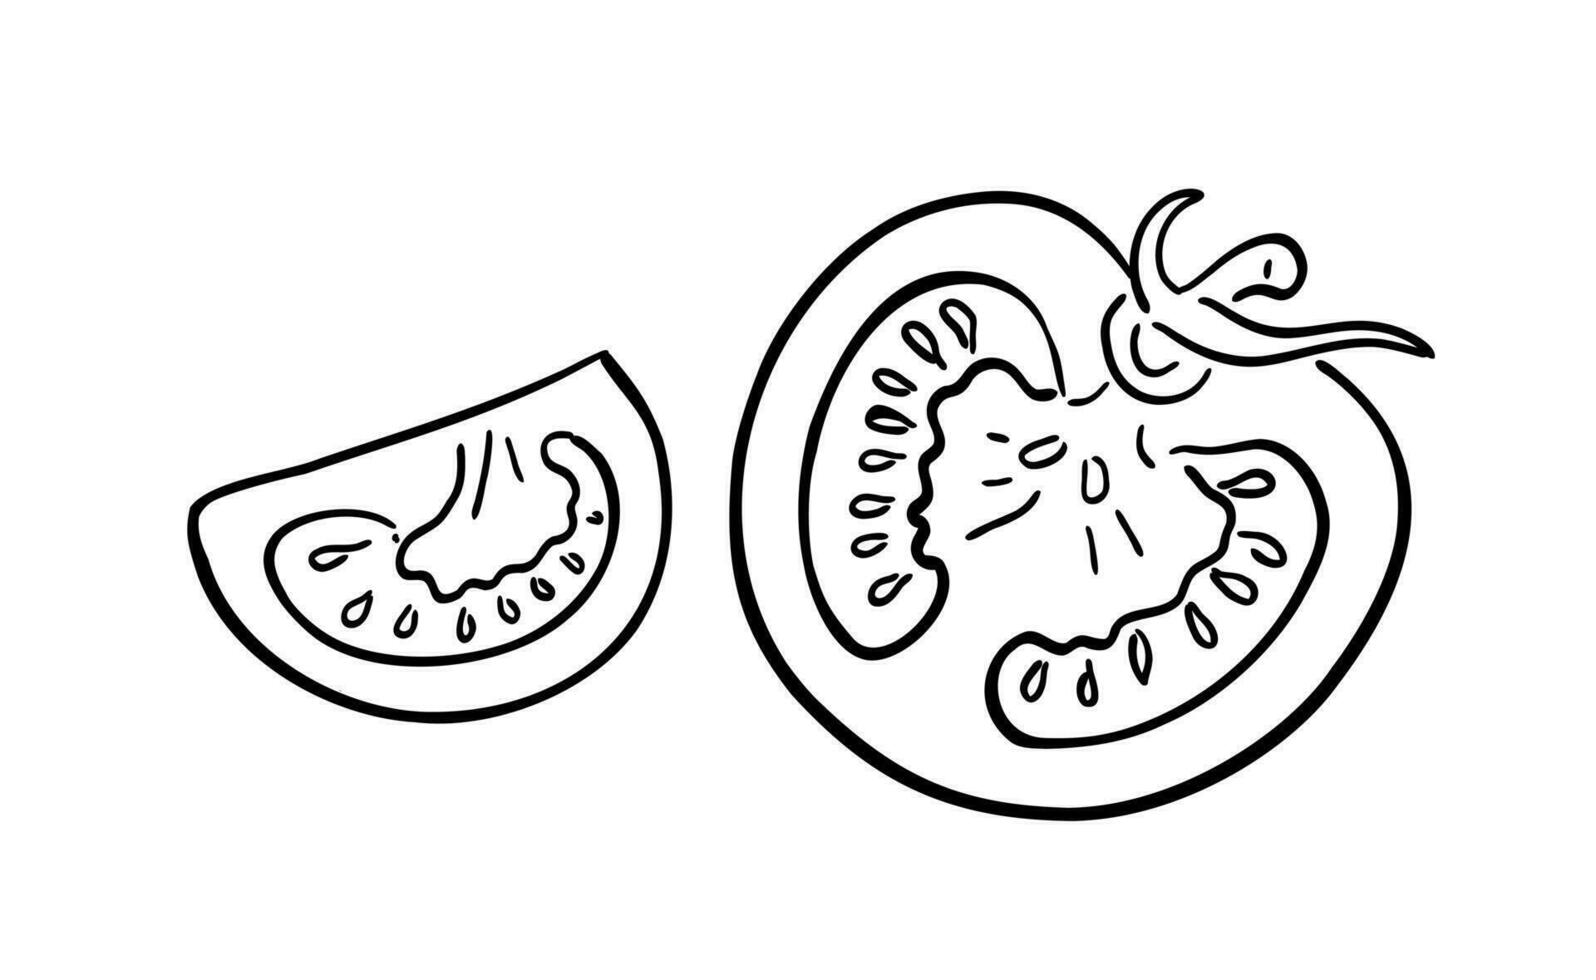 Fresh tomatoes. Vegetables. A slice and a whole tomato. Vector illustration in doodle style